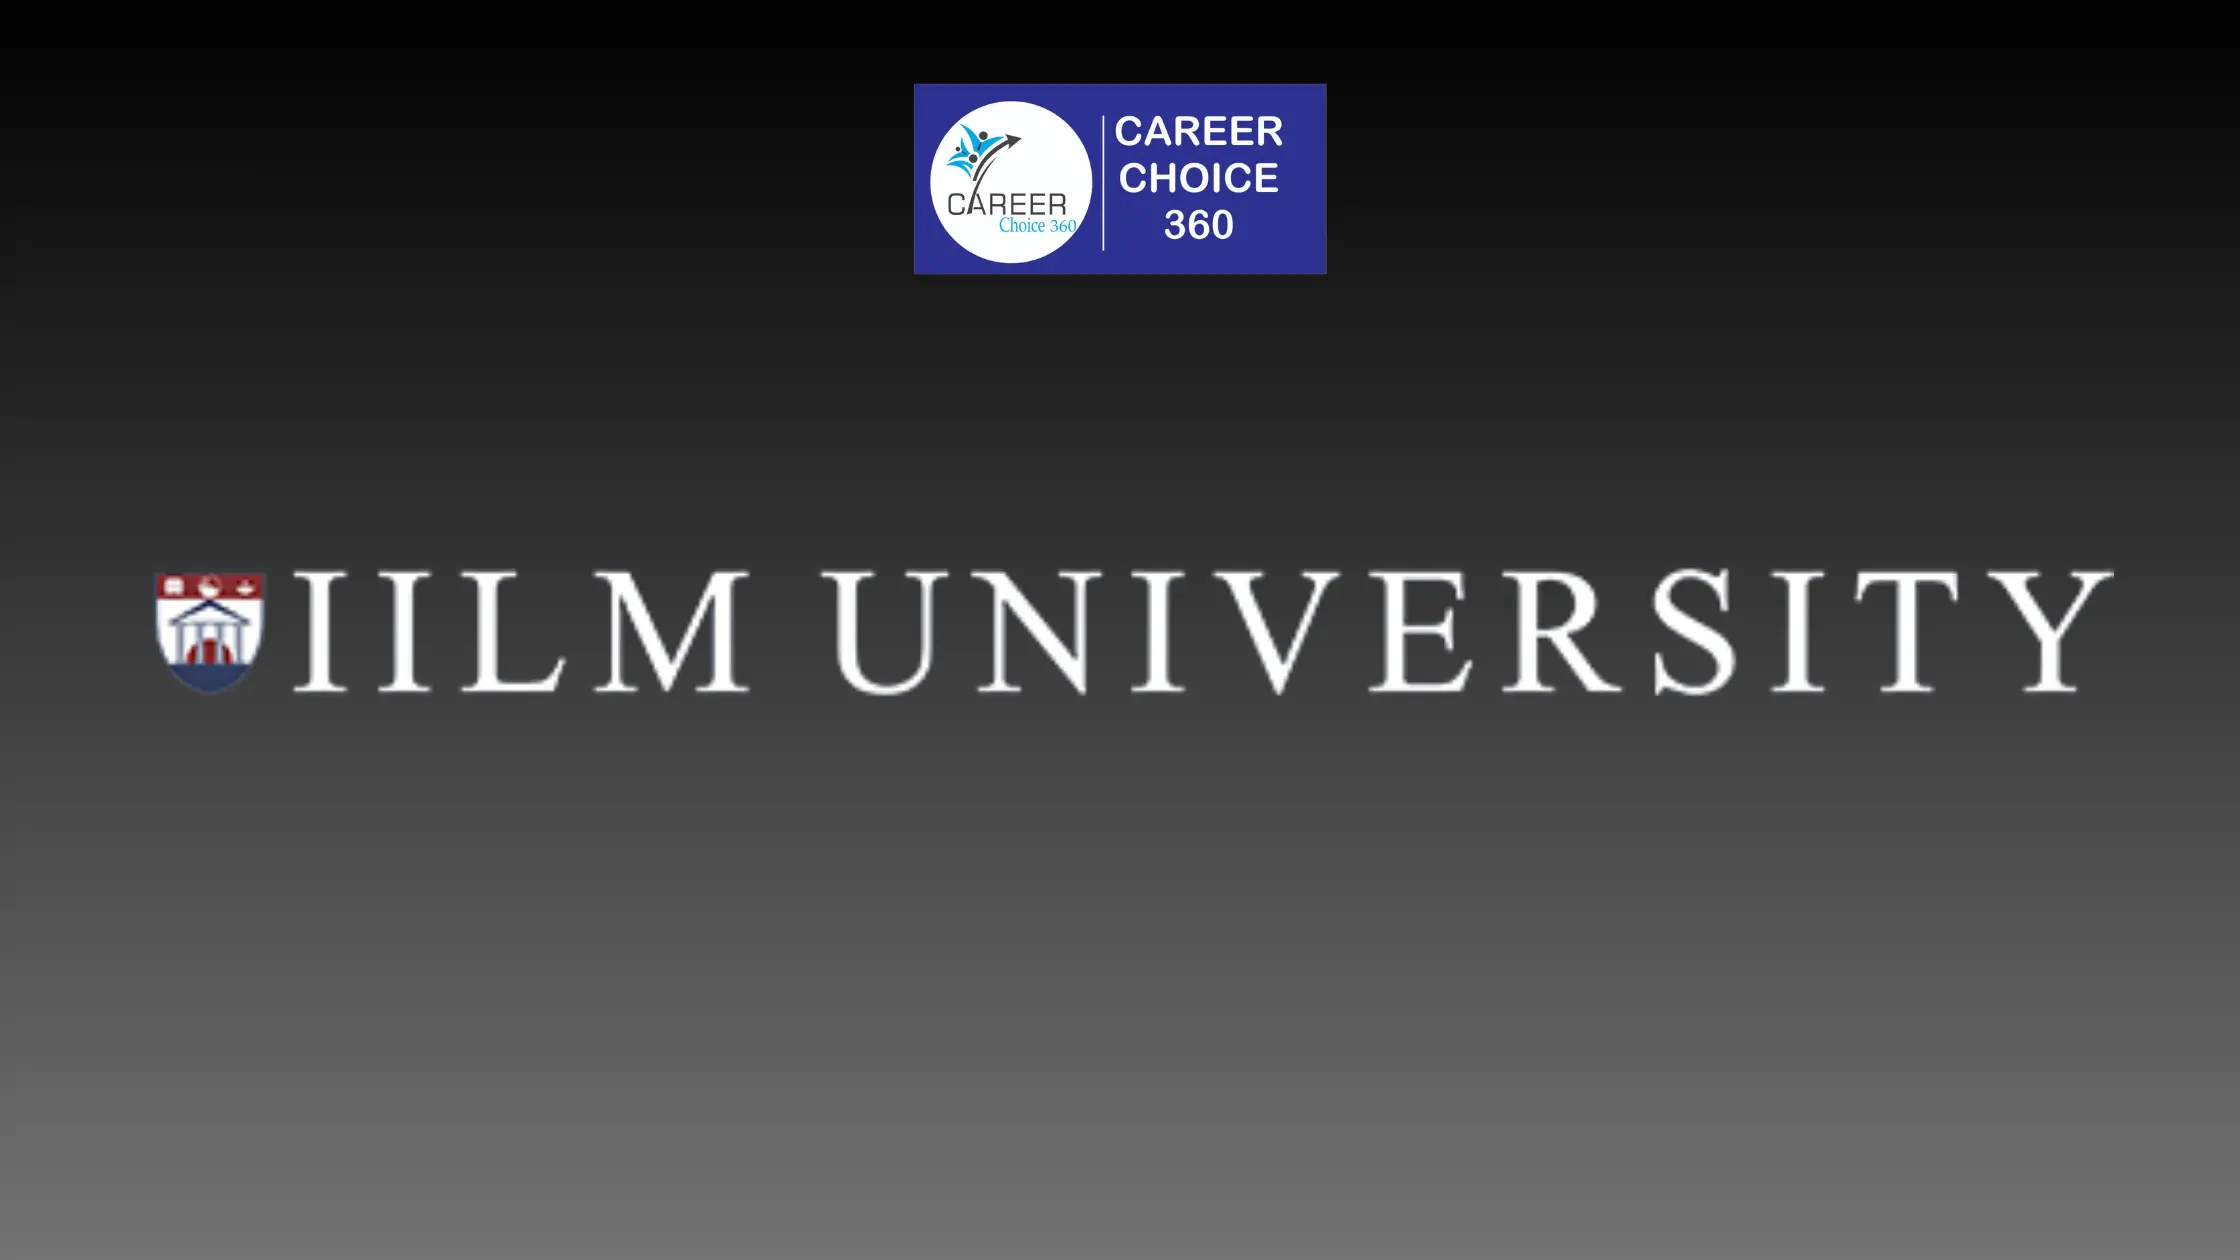 You are currently viewing IILM University, Gurgaon : Highlights, Courses and Fees, Eligibility, Selection Criteria, Ranking